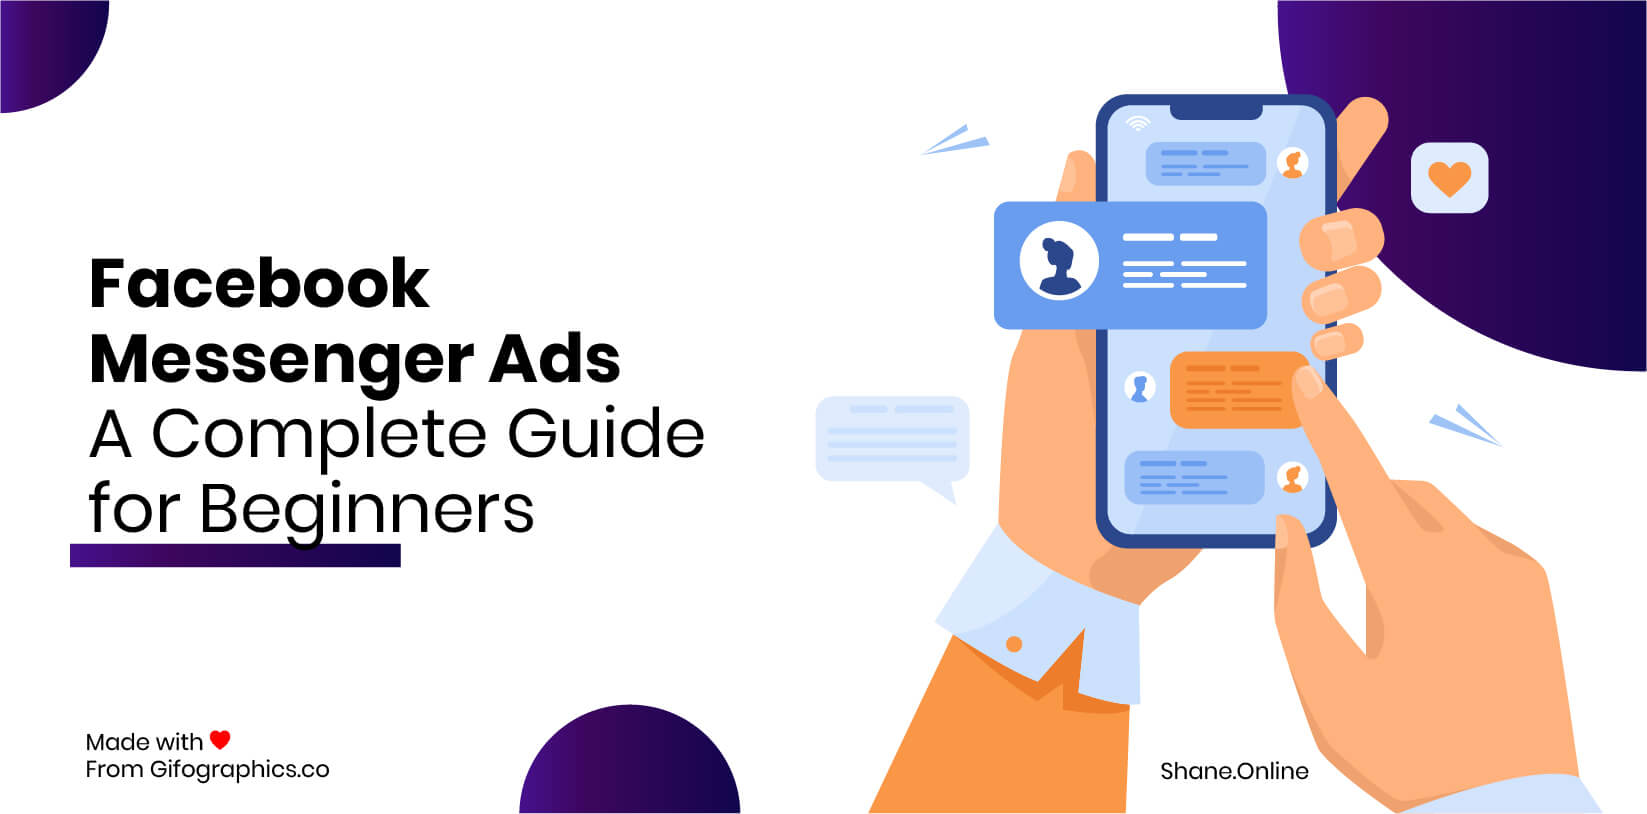 Facebook Messenger Ads- A Complete Guide for Beginners